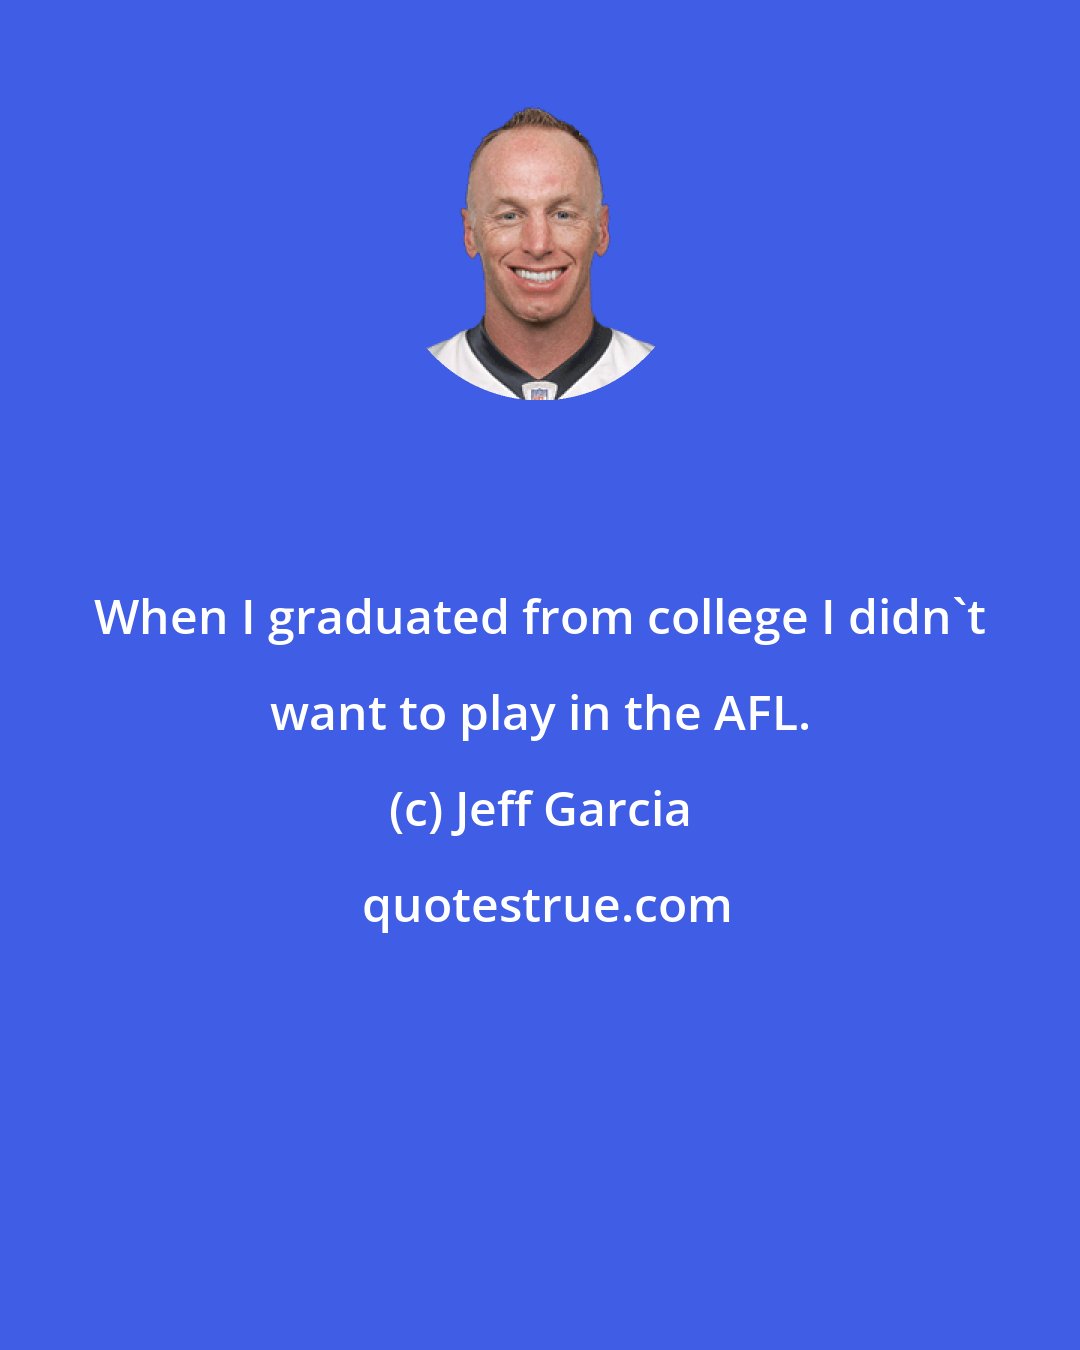 Jeff Garcia: When I graduated from college I didn't want to play in the AFL.